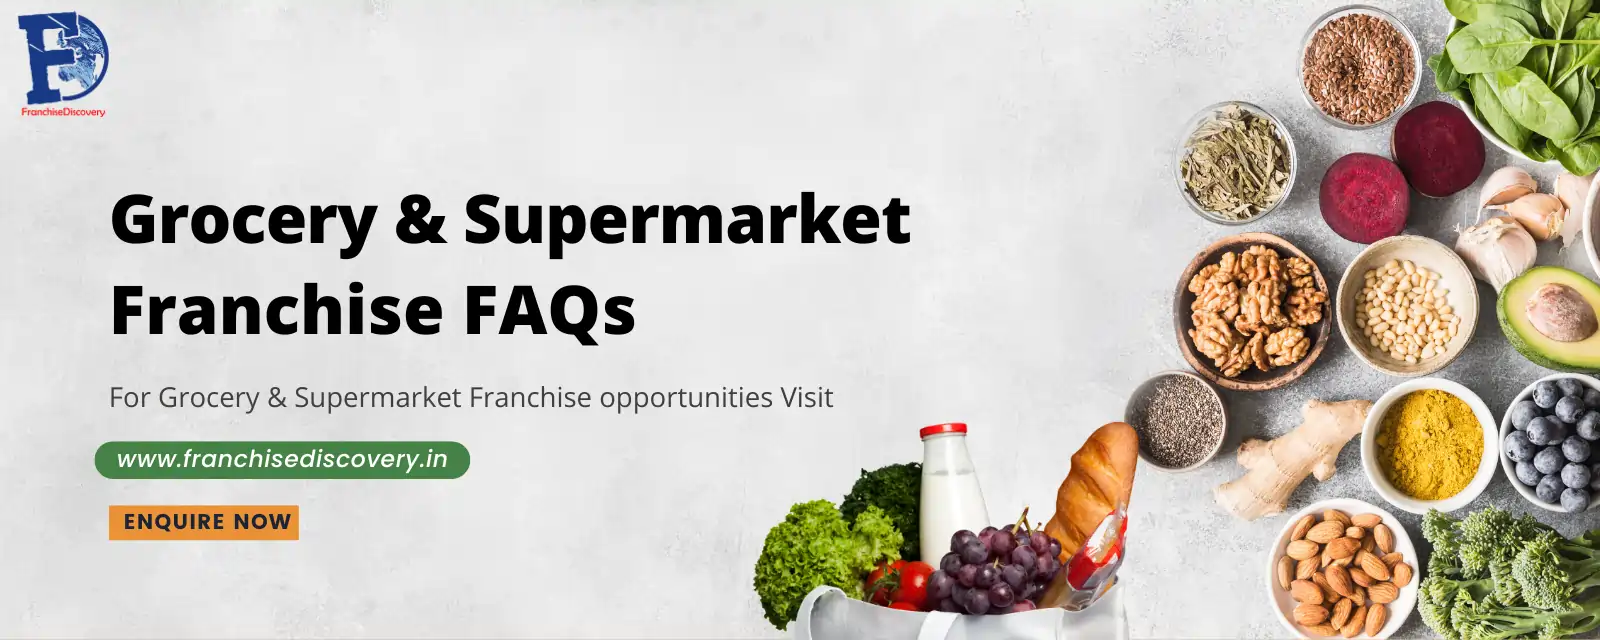 Grocery & Supermarket Franchise FAQs in India